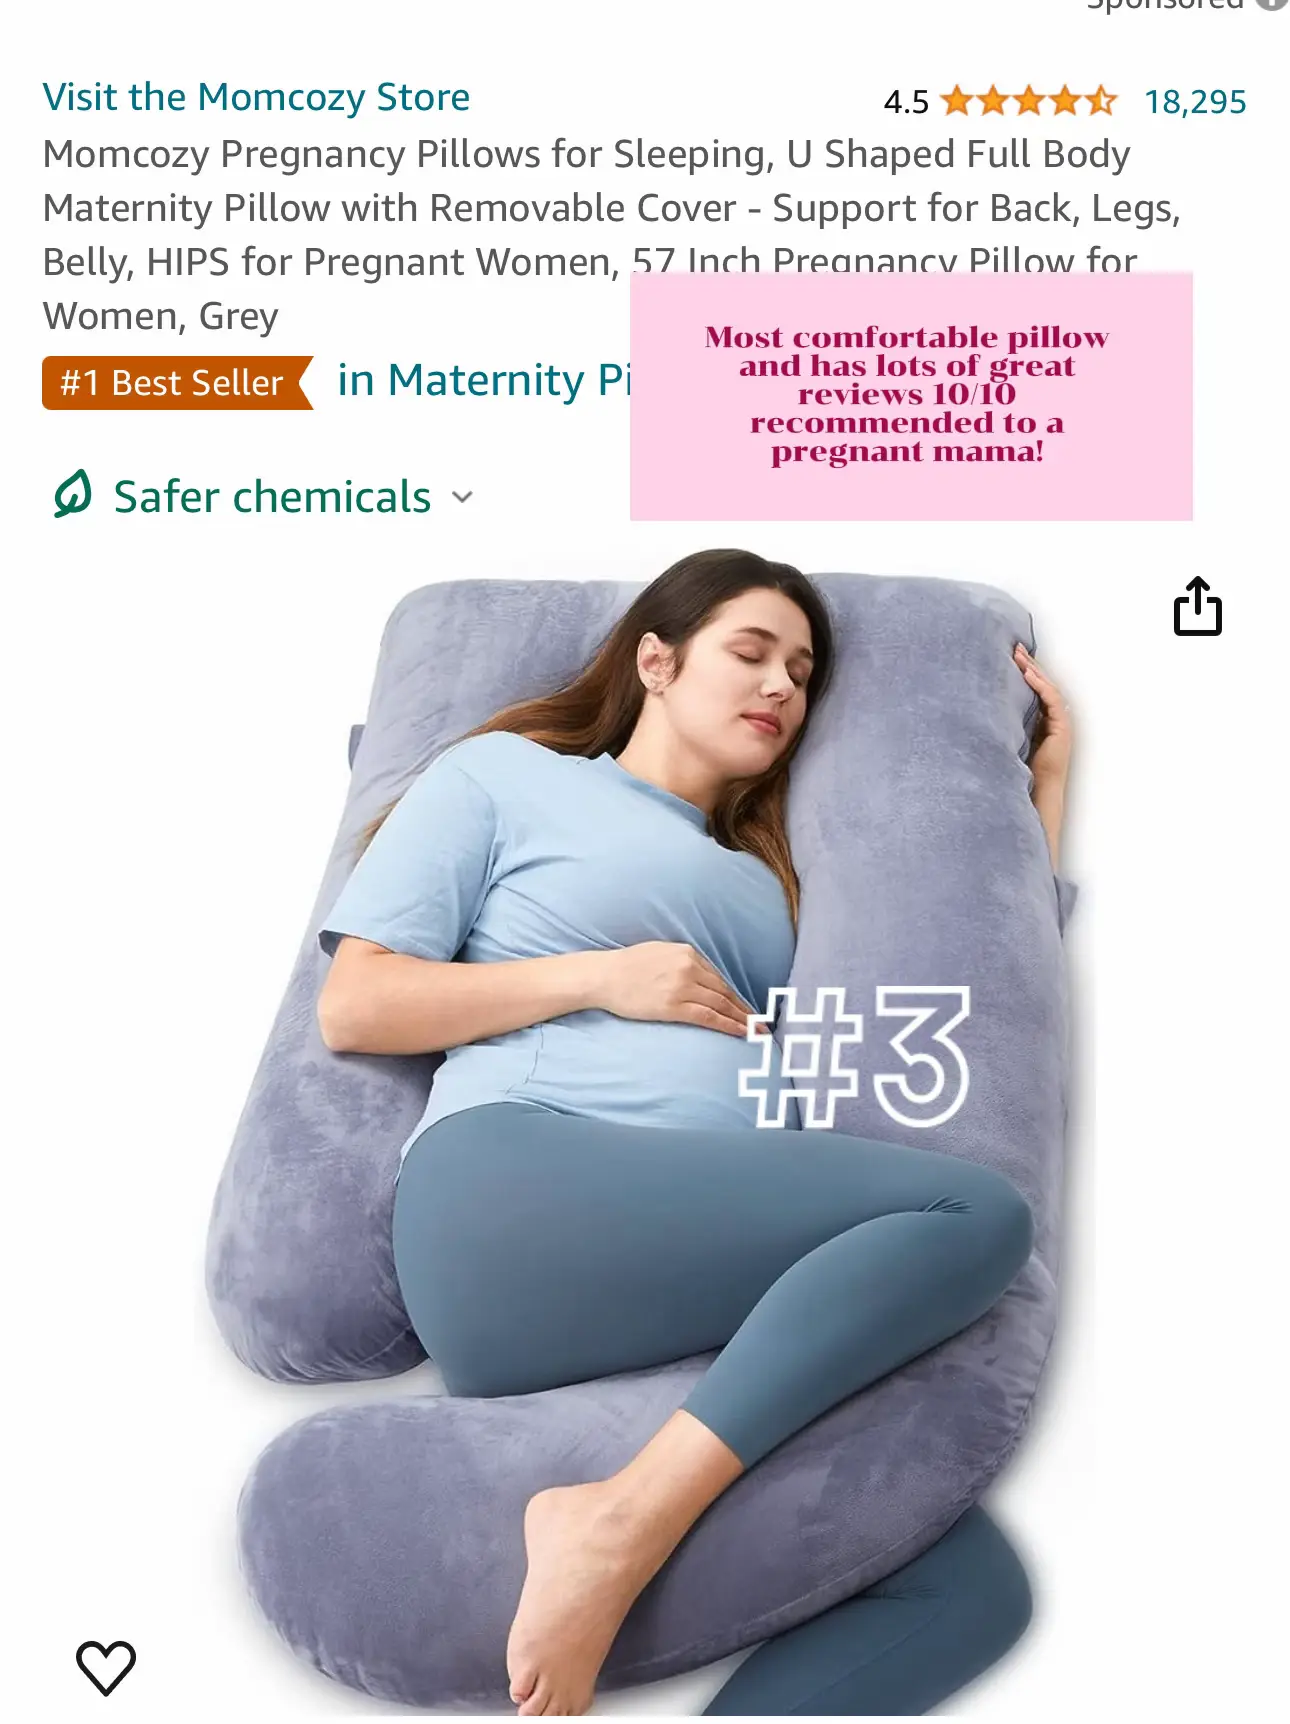 Momcozy Pregnancy Pillow Sale: Get Up To 40% Off